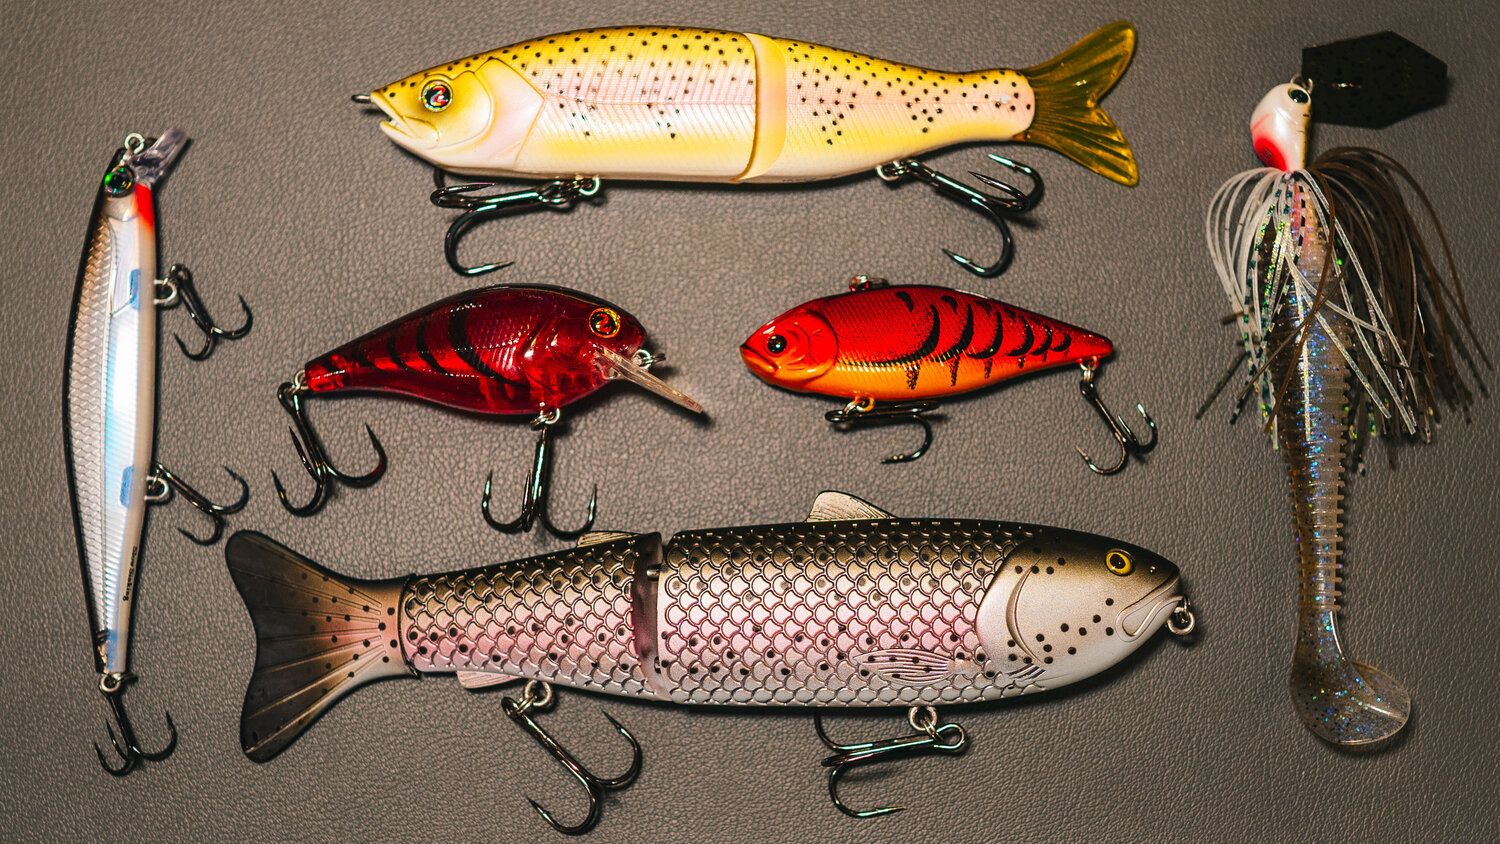 Watch 5 Best Lures For Spring Bass Fishing, How To